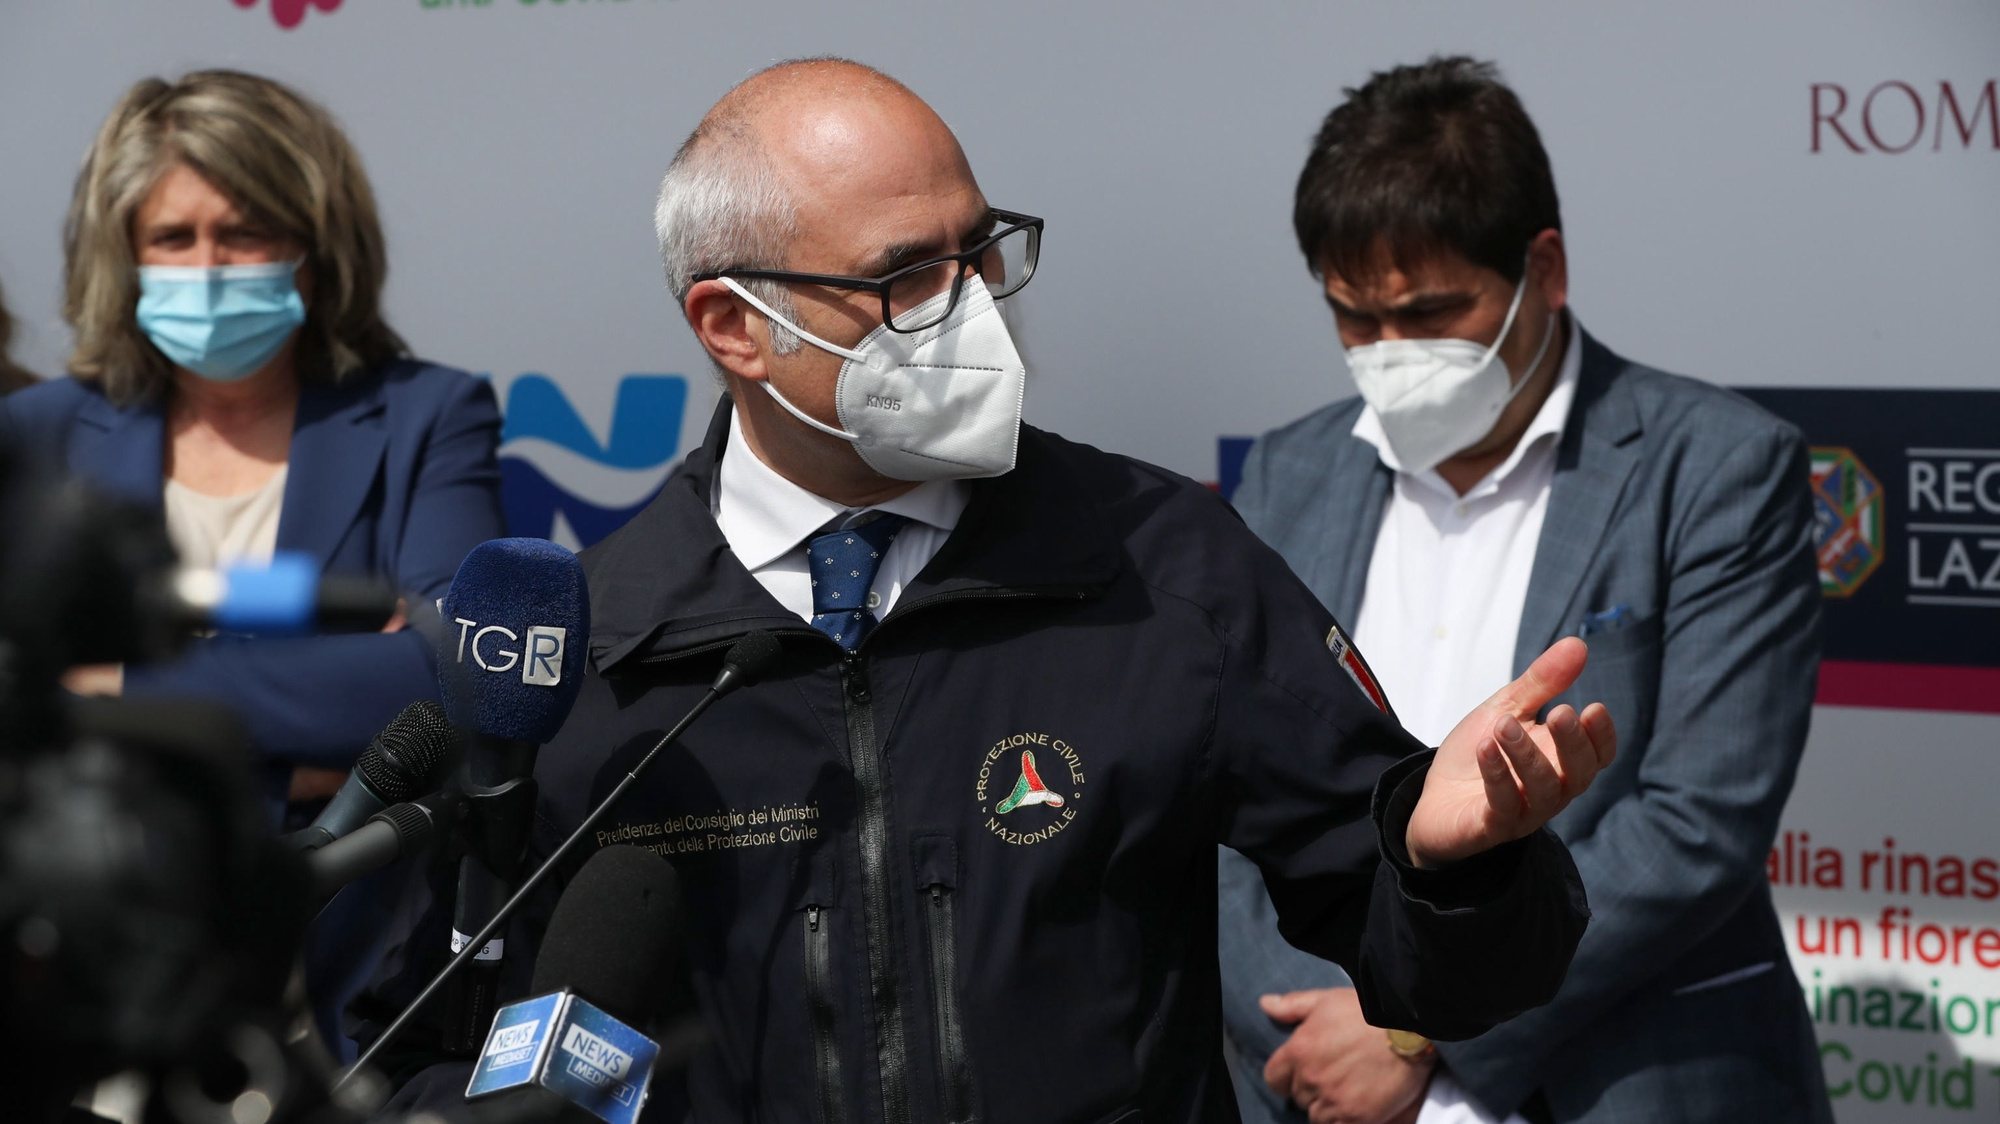 epa09175286 The Head of Civil Protection, Fabrizio Curcio, during the inauguration of the vaccination hub at the water polo center in Rome, Italy, 03 May 2021. Emergency Commissioner for Covid-19 Francesco Figliuolo said authorities are considering extending Astrazeneca vaccination to the &#039;age group under 60&#039;.  EPA/EMANUELE VALERI